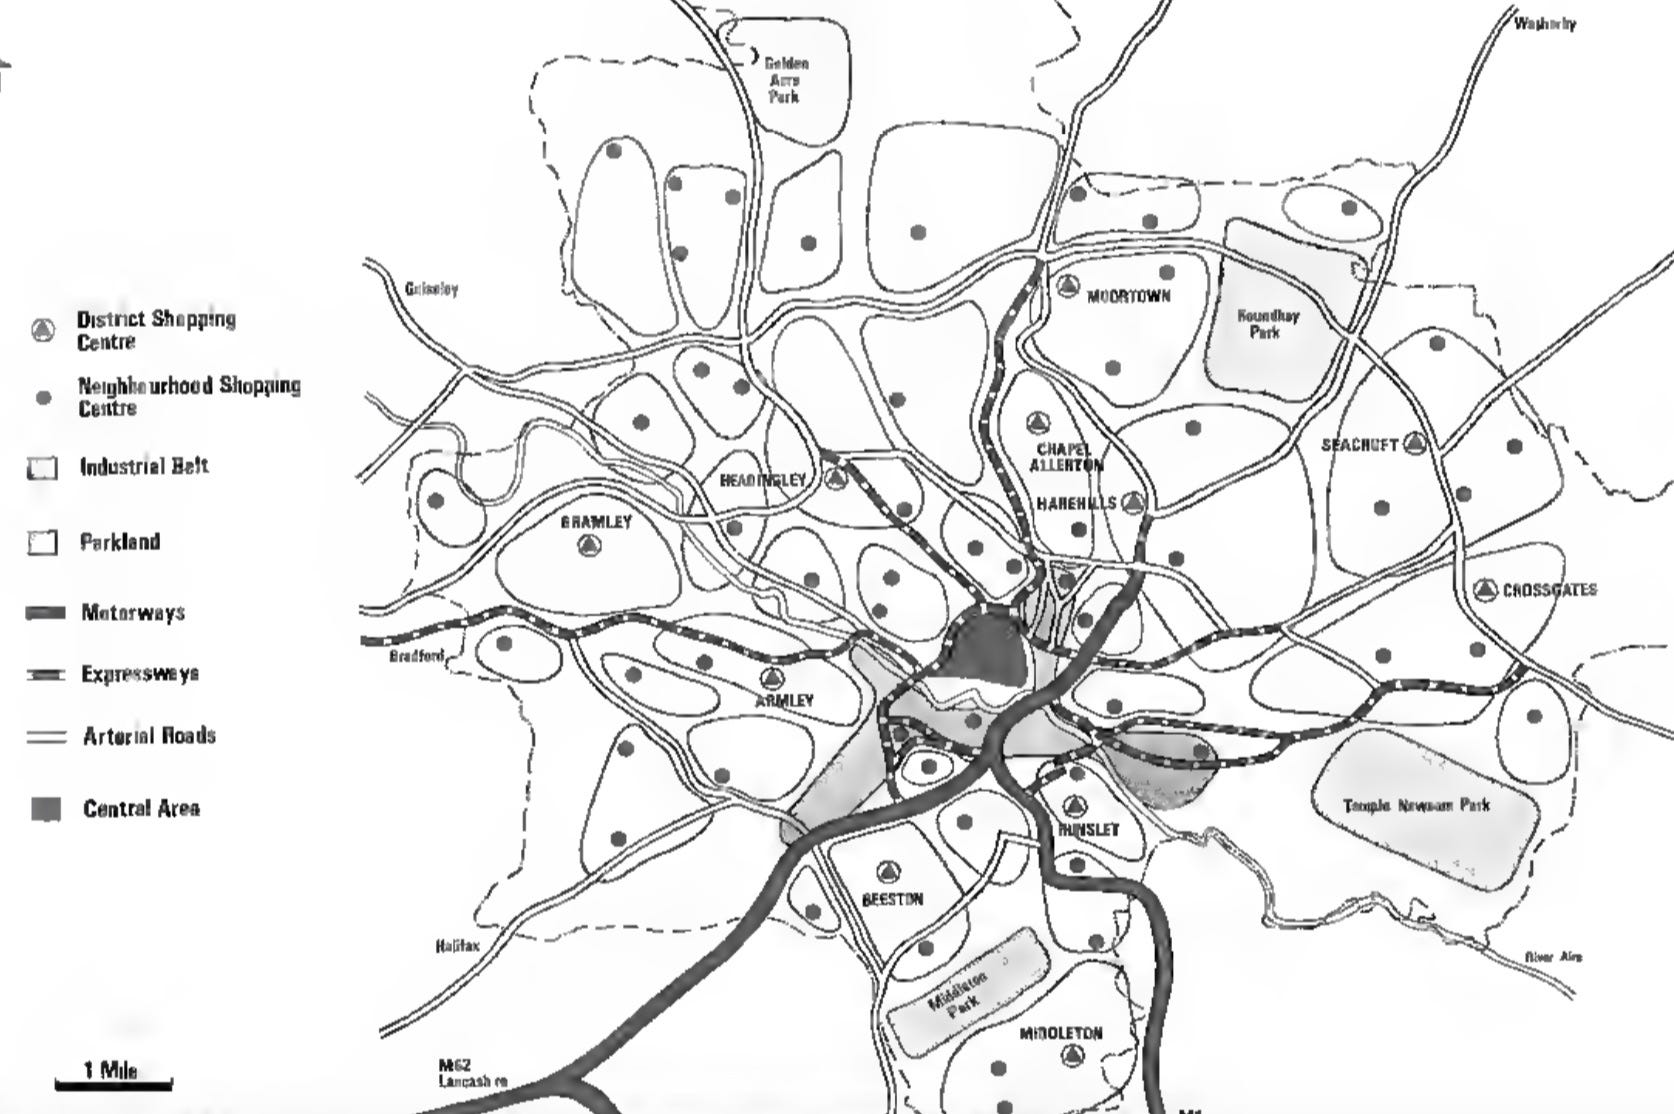 The plan for the Leeds primary road network. Source: HMSO, Planning and Transport — The Leeds Approach (1969)